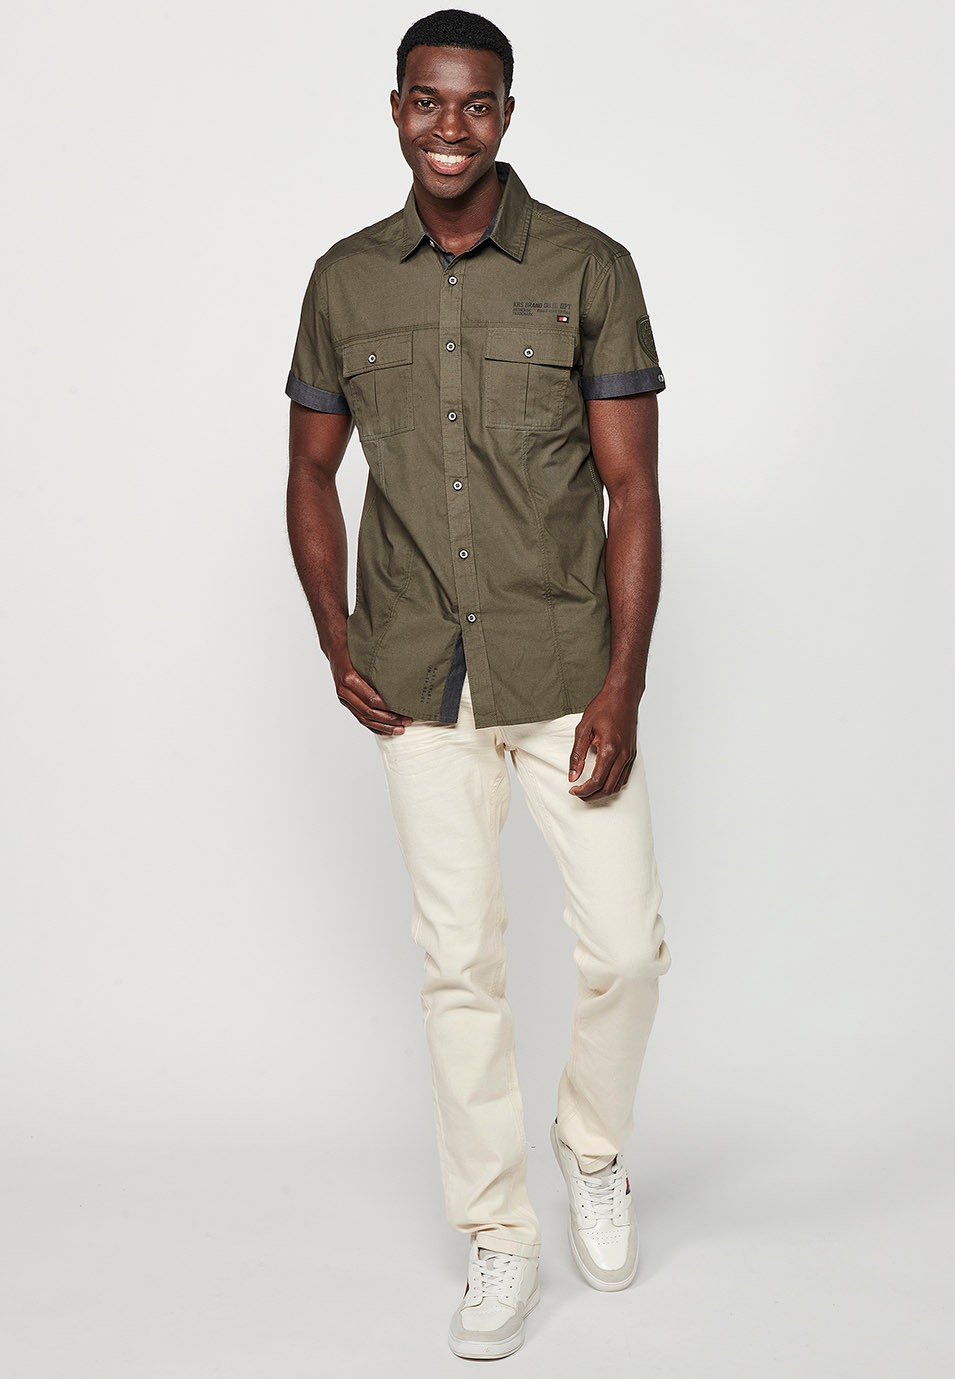 Short Sleeve Cotton Shirt with Button Front Closure and Front Flap Pockets in Olive Color for Men 4